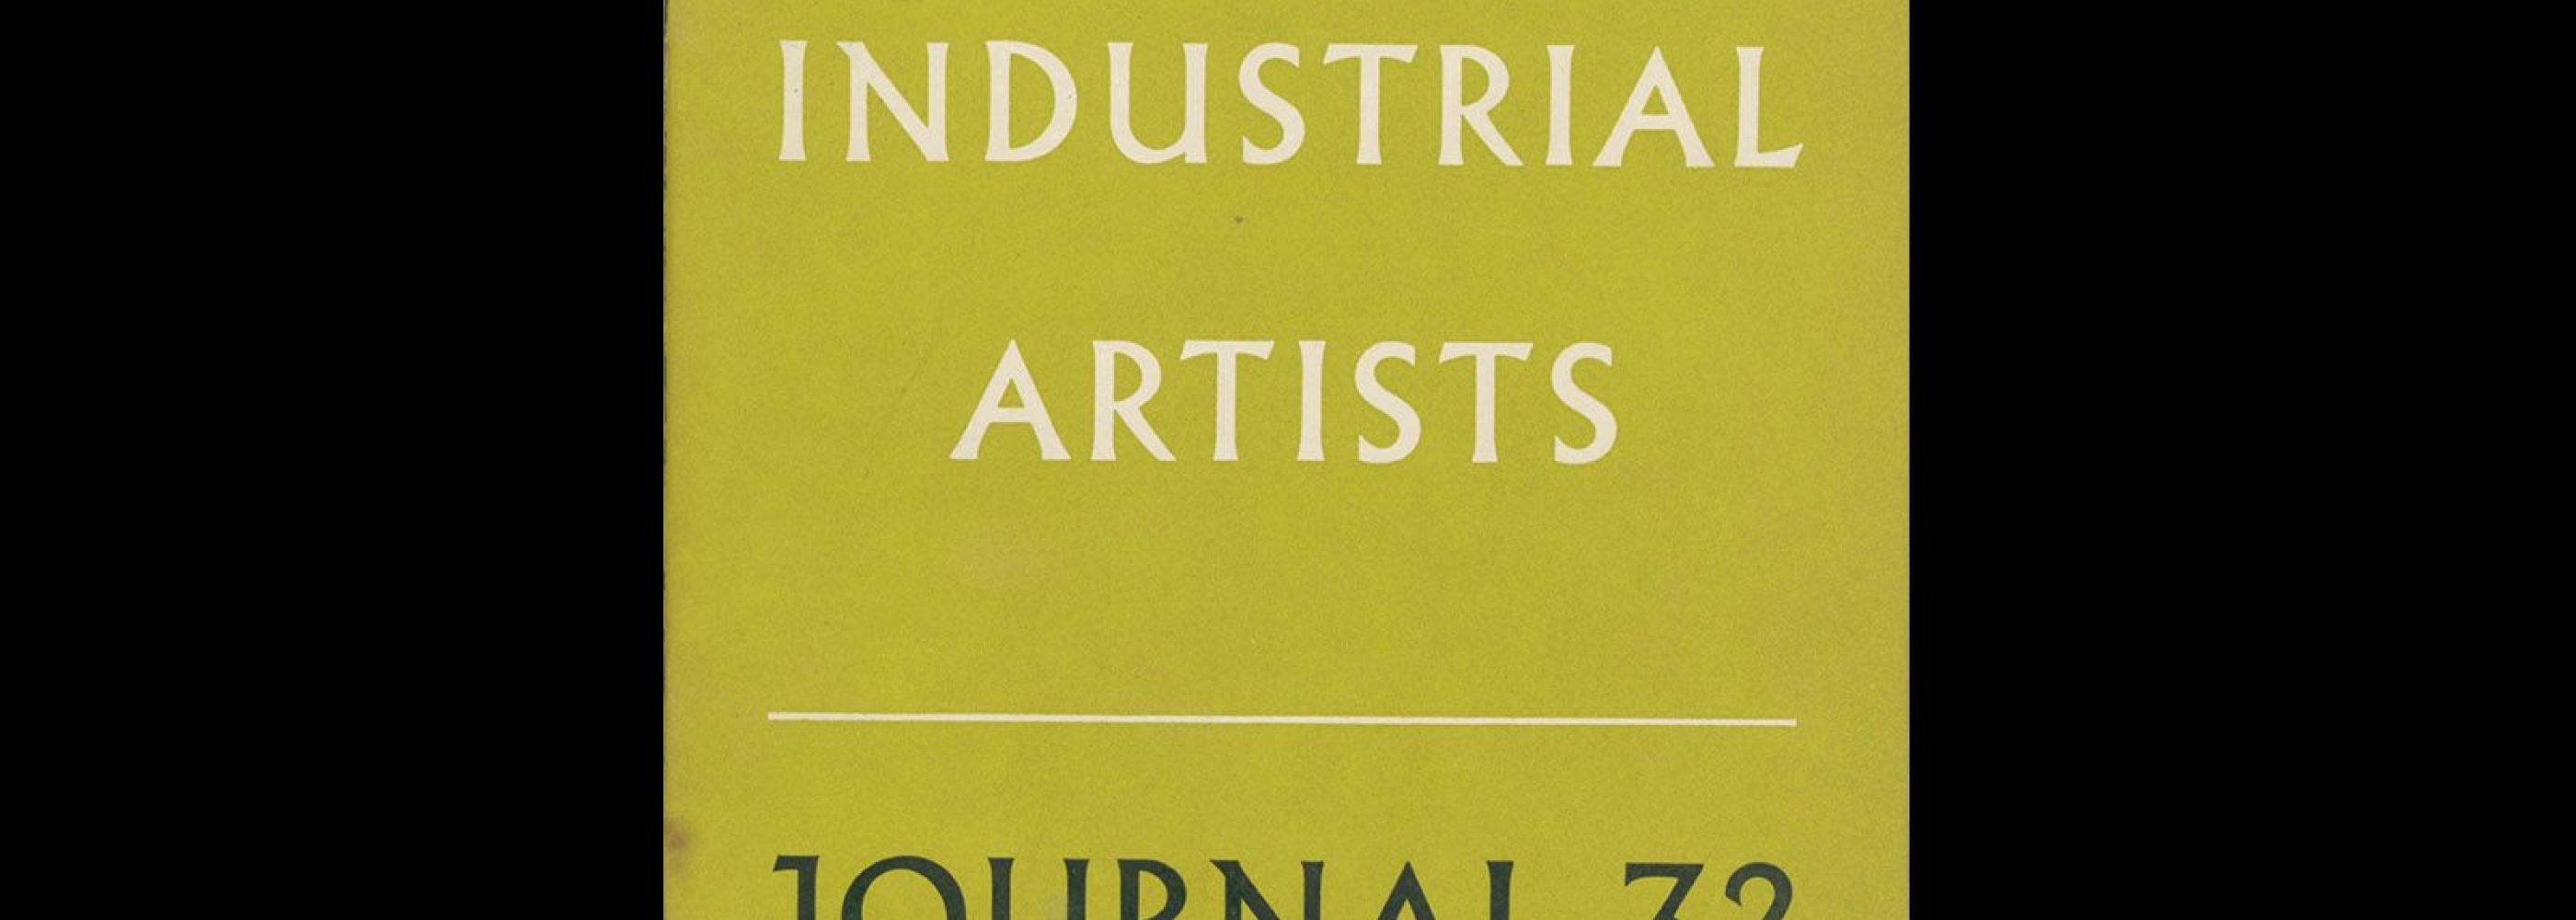 Society of Industrial Artists, 32, April 1953